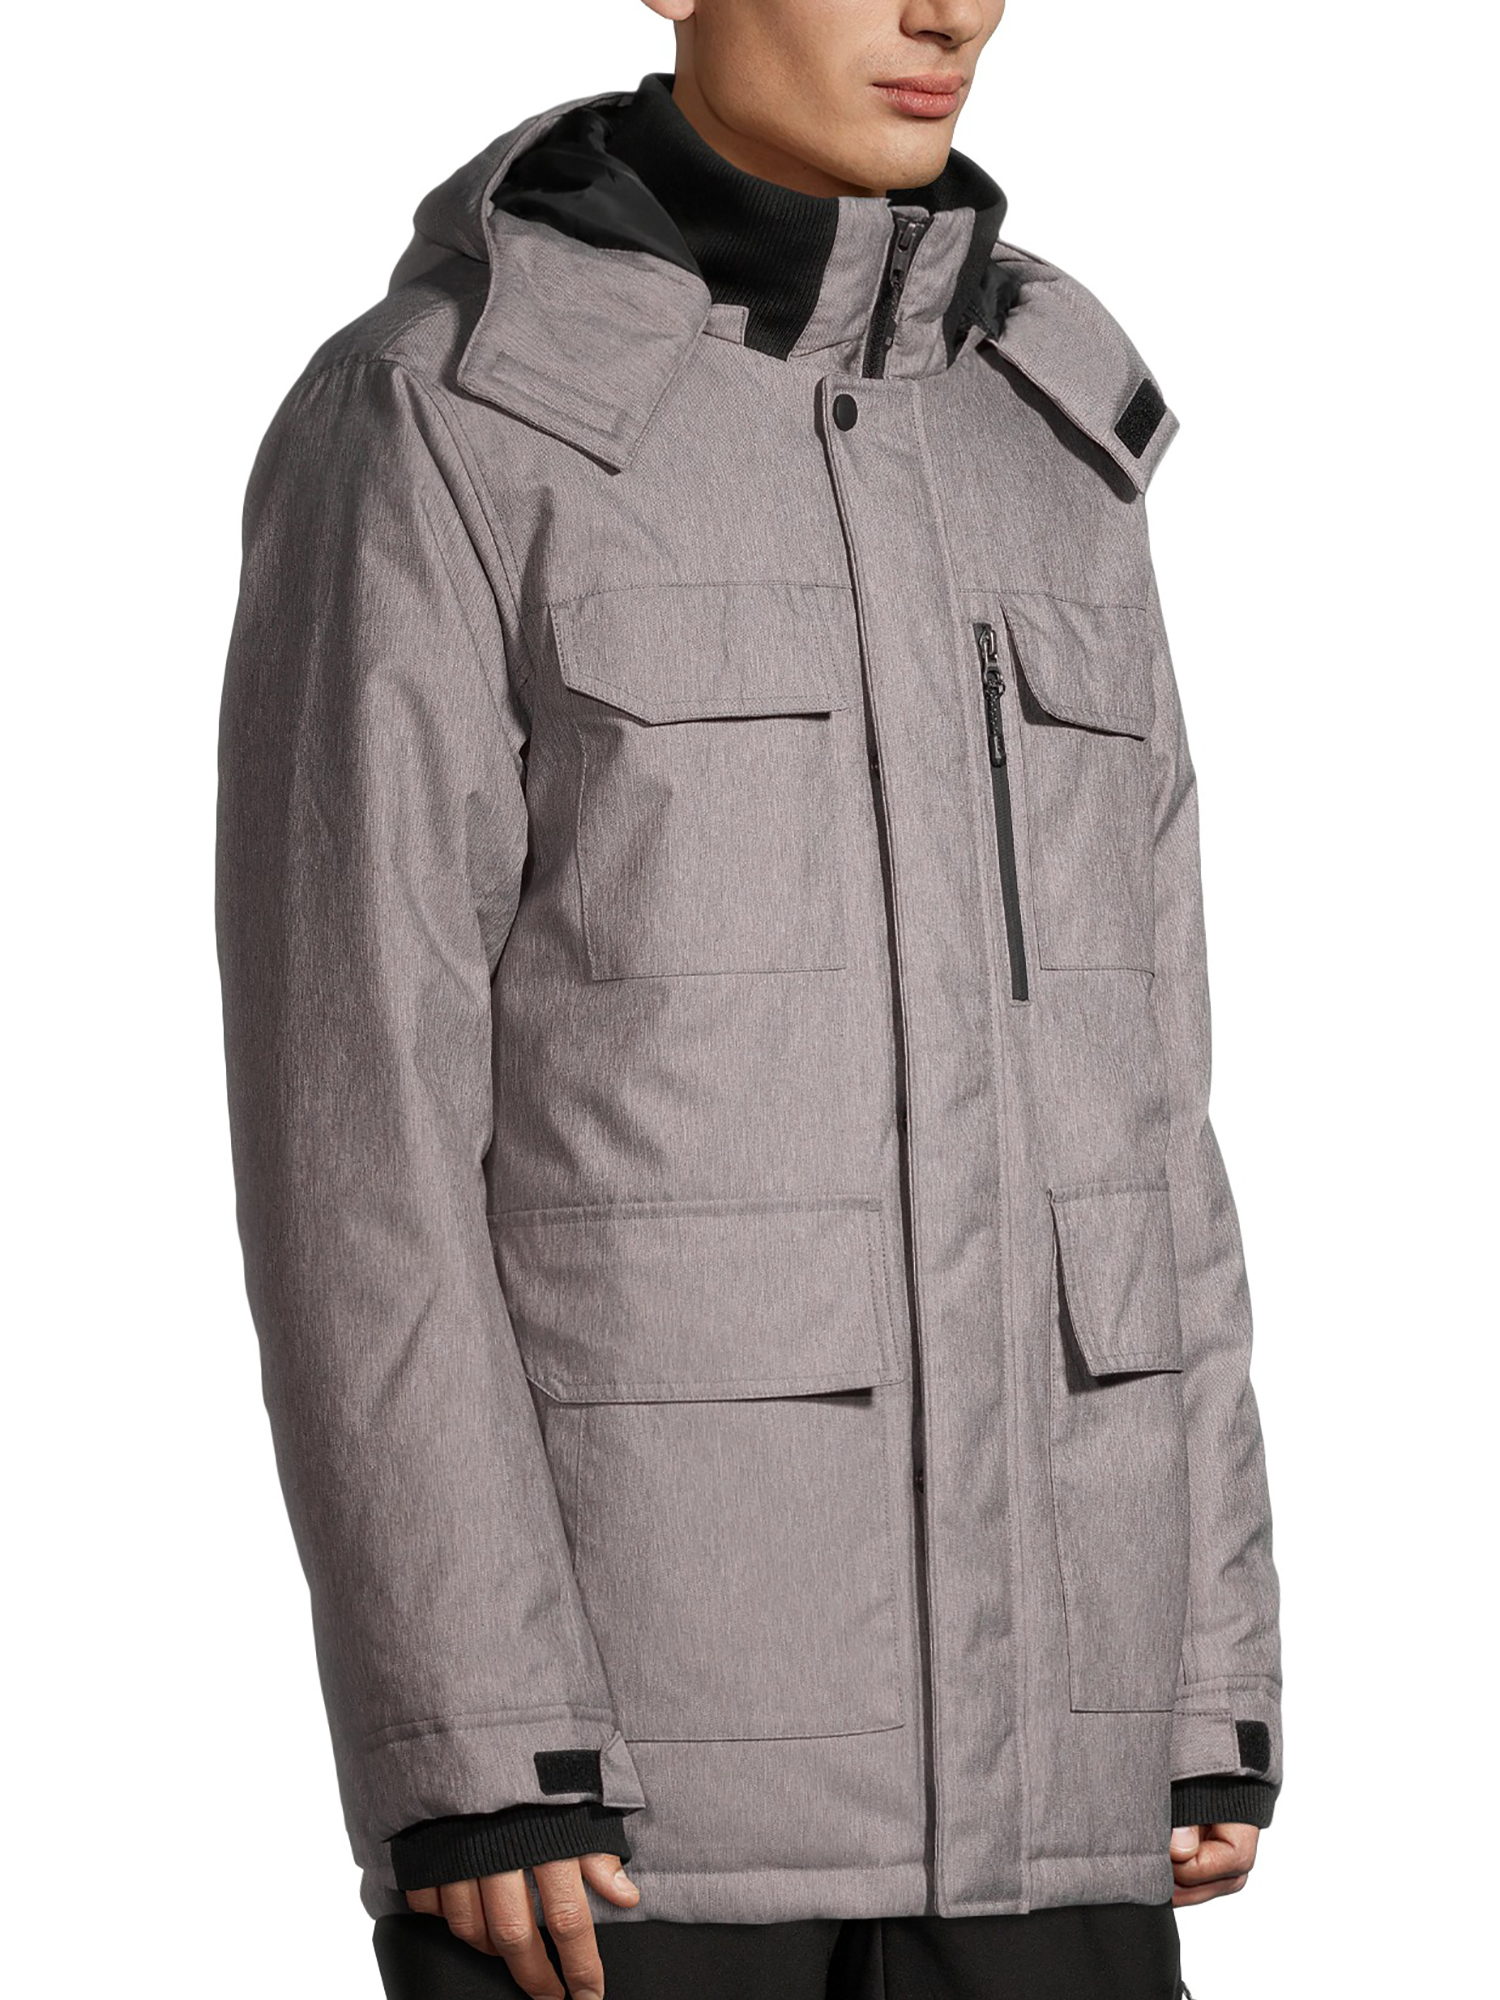 SwissTech Men's and Big Men's Parka Jacket, Up to Size 5XL - image 4 of 6